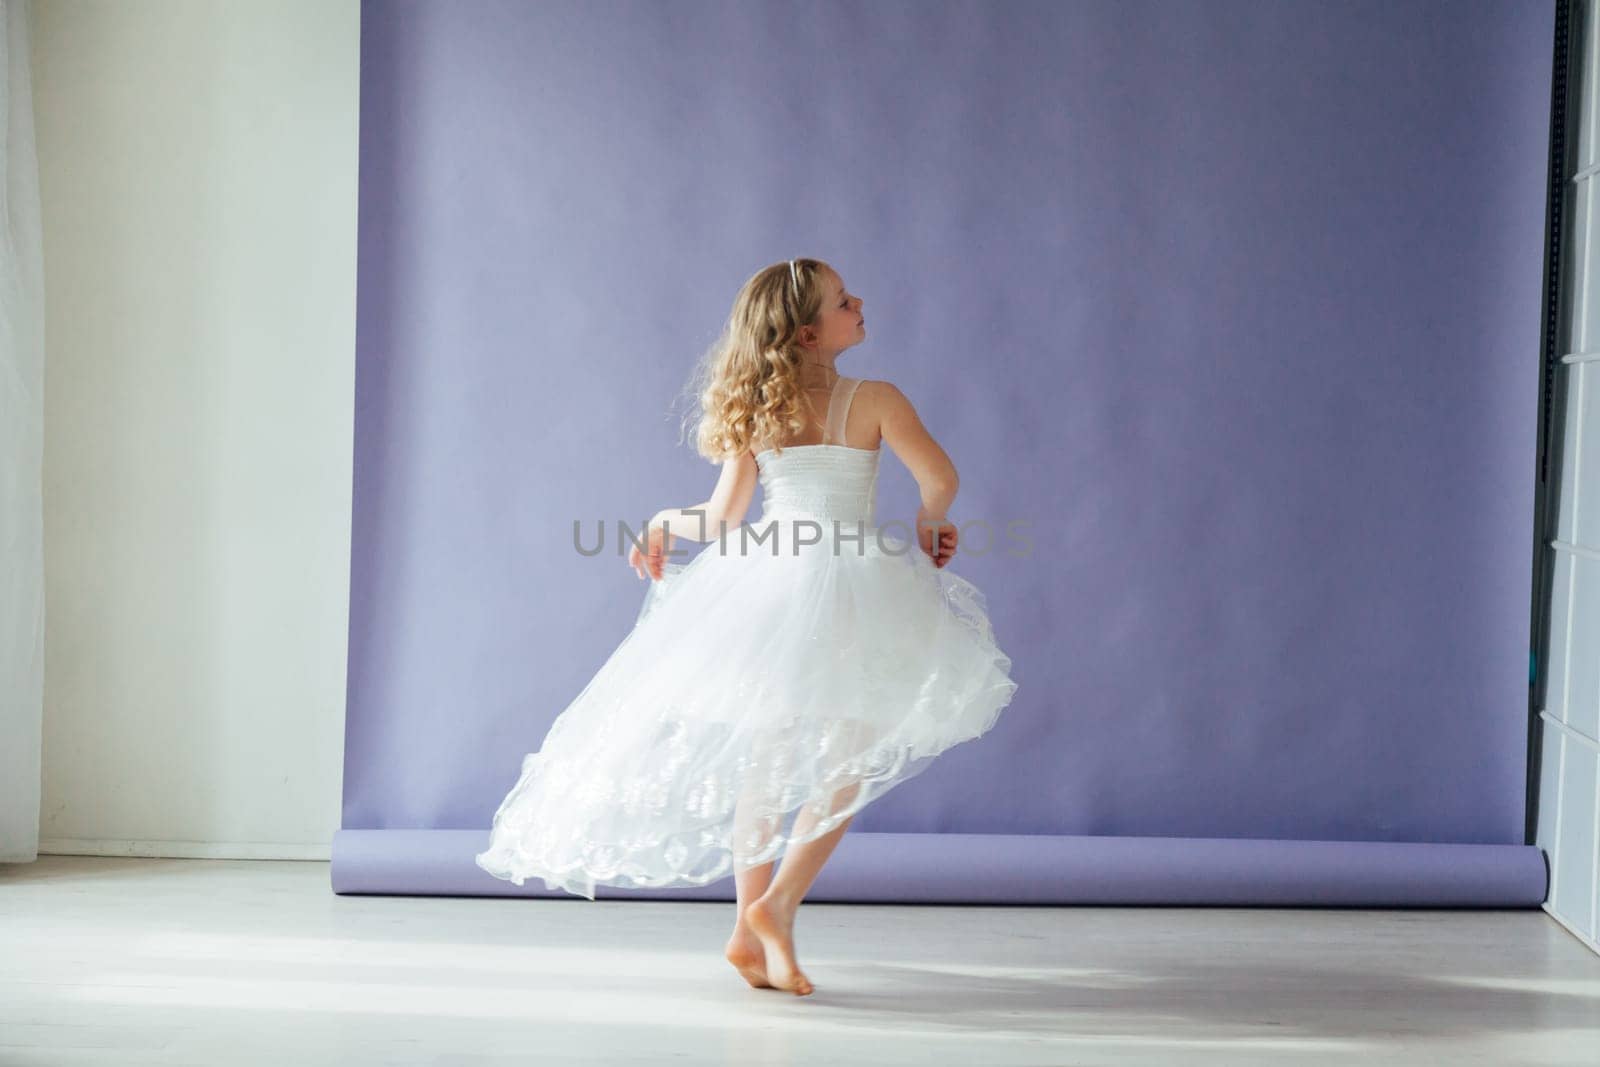 Beautiful girl of 10 years dancing alone in a white dress